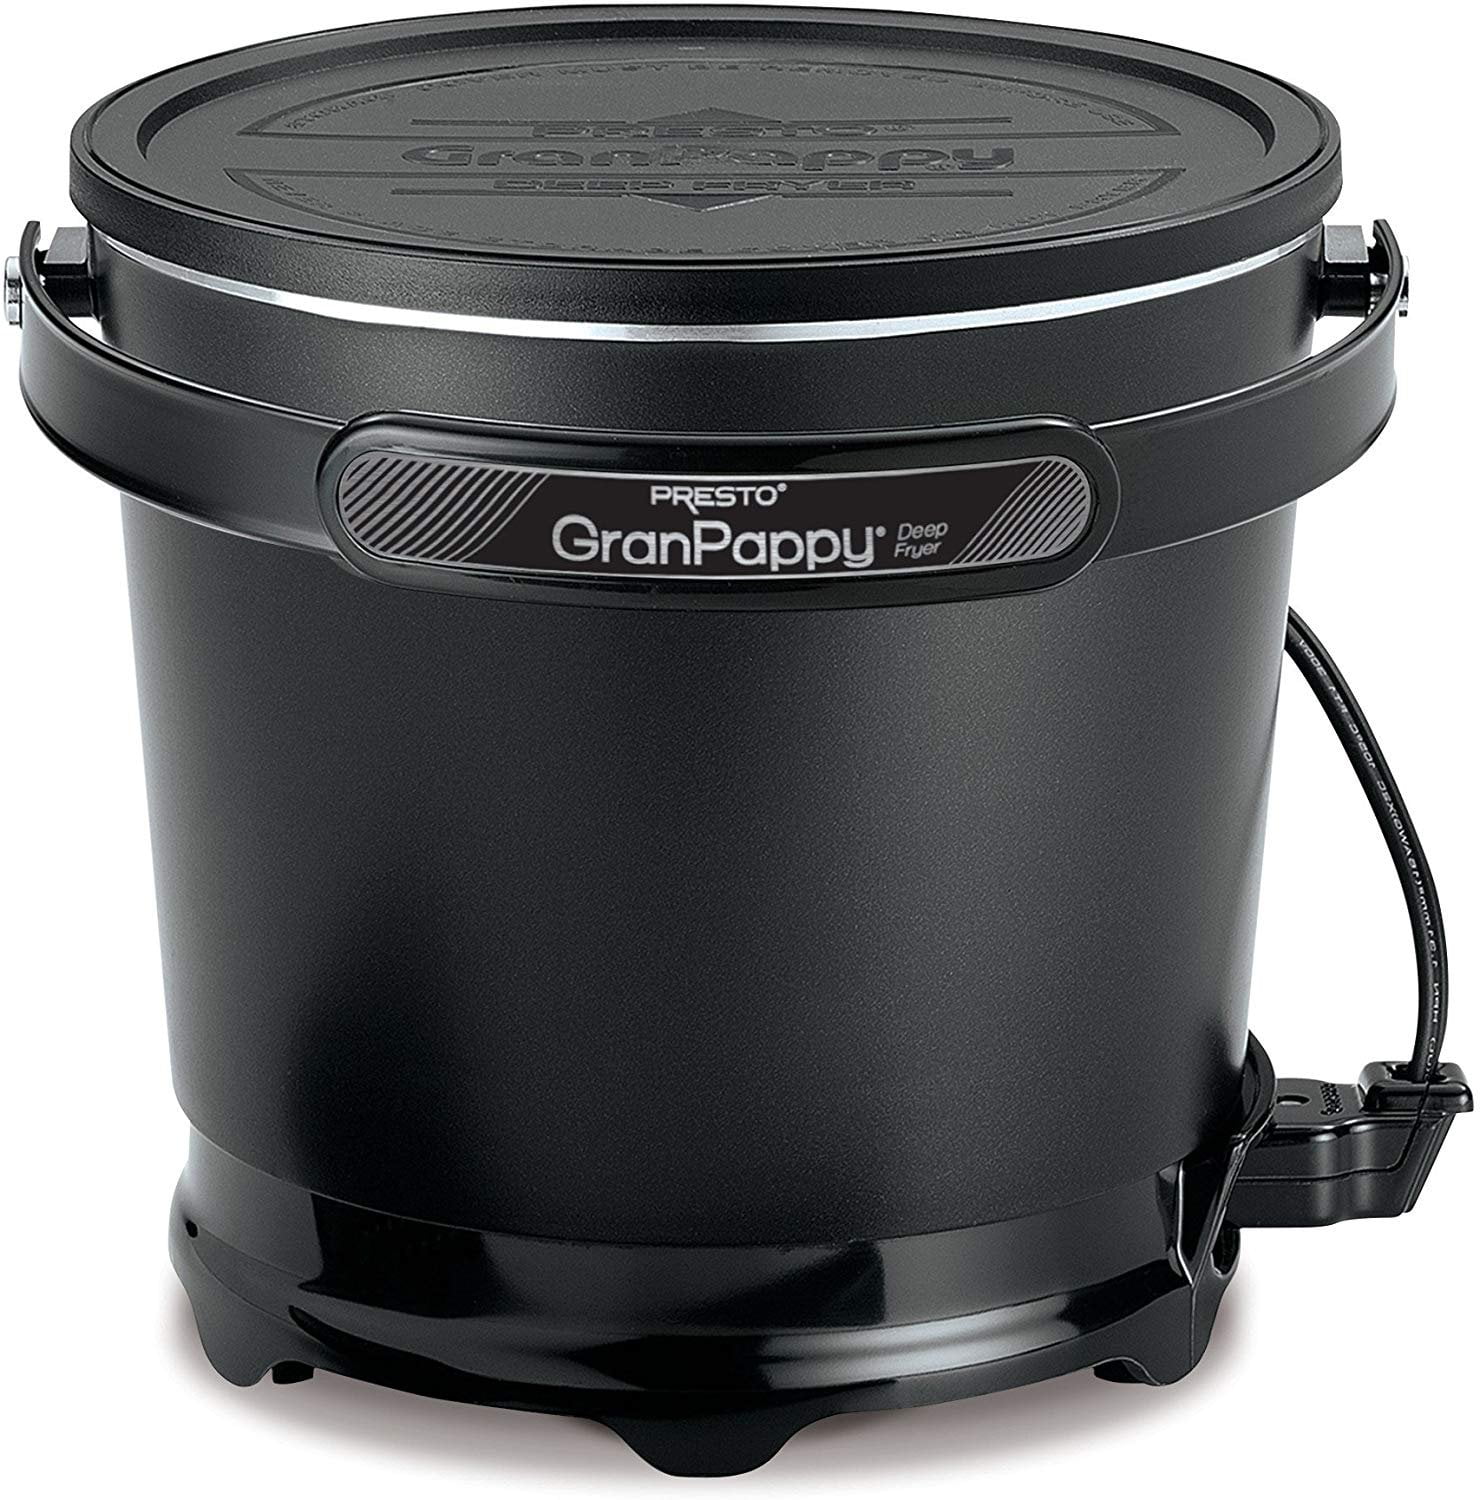 Pesto 32331 lid for Gran Pappy fryers.